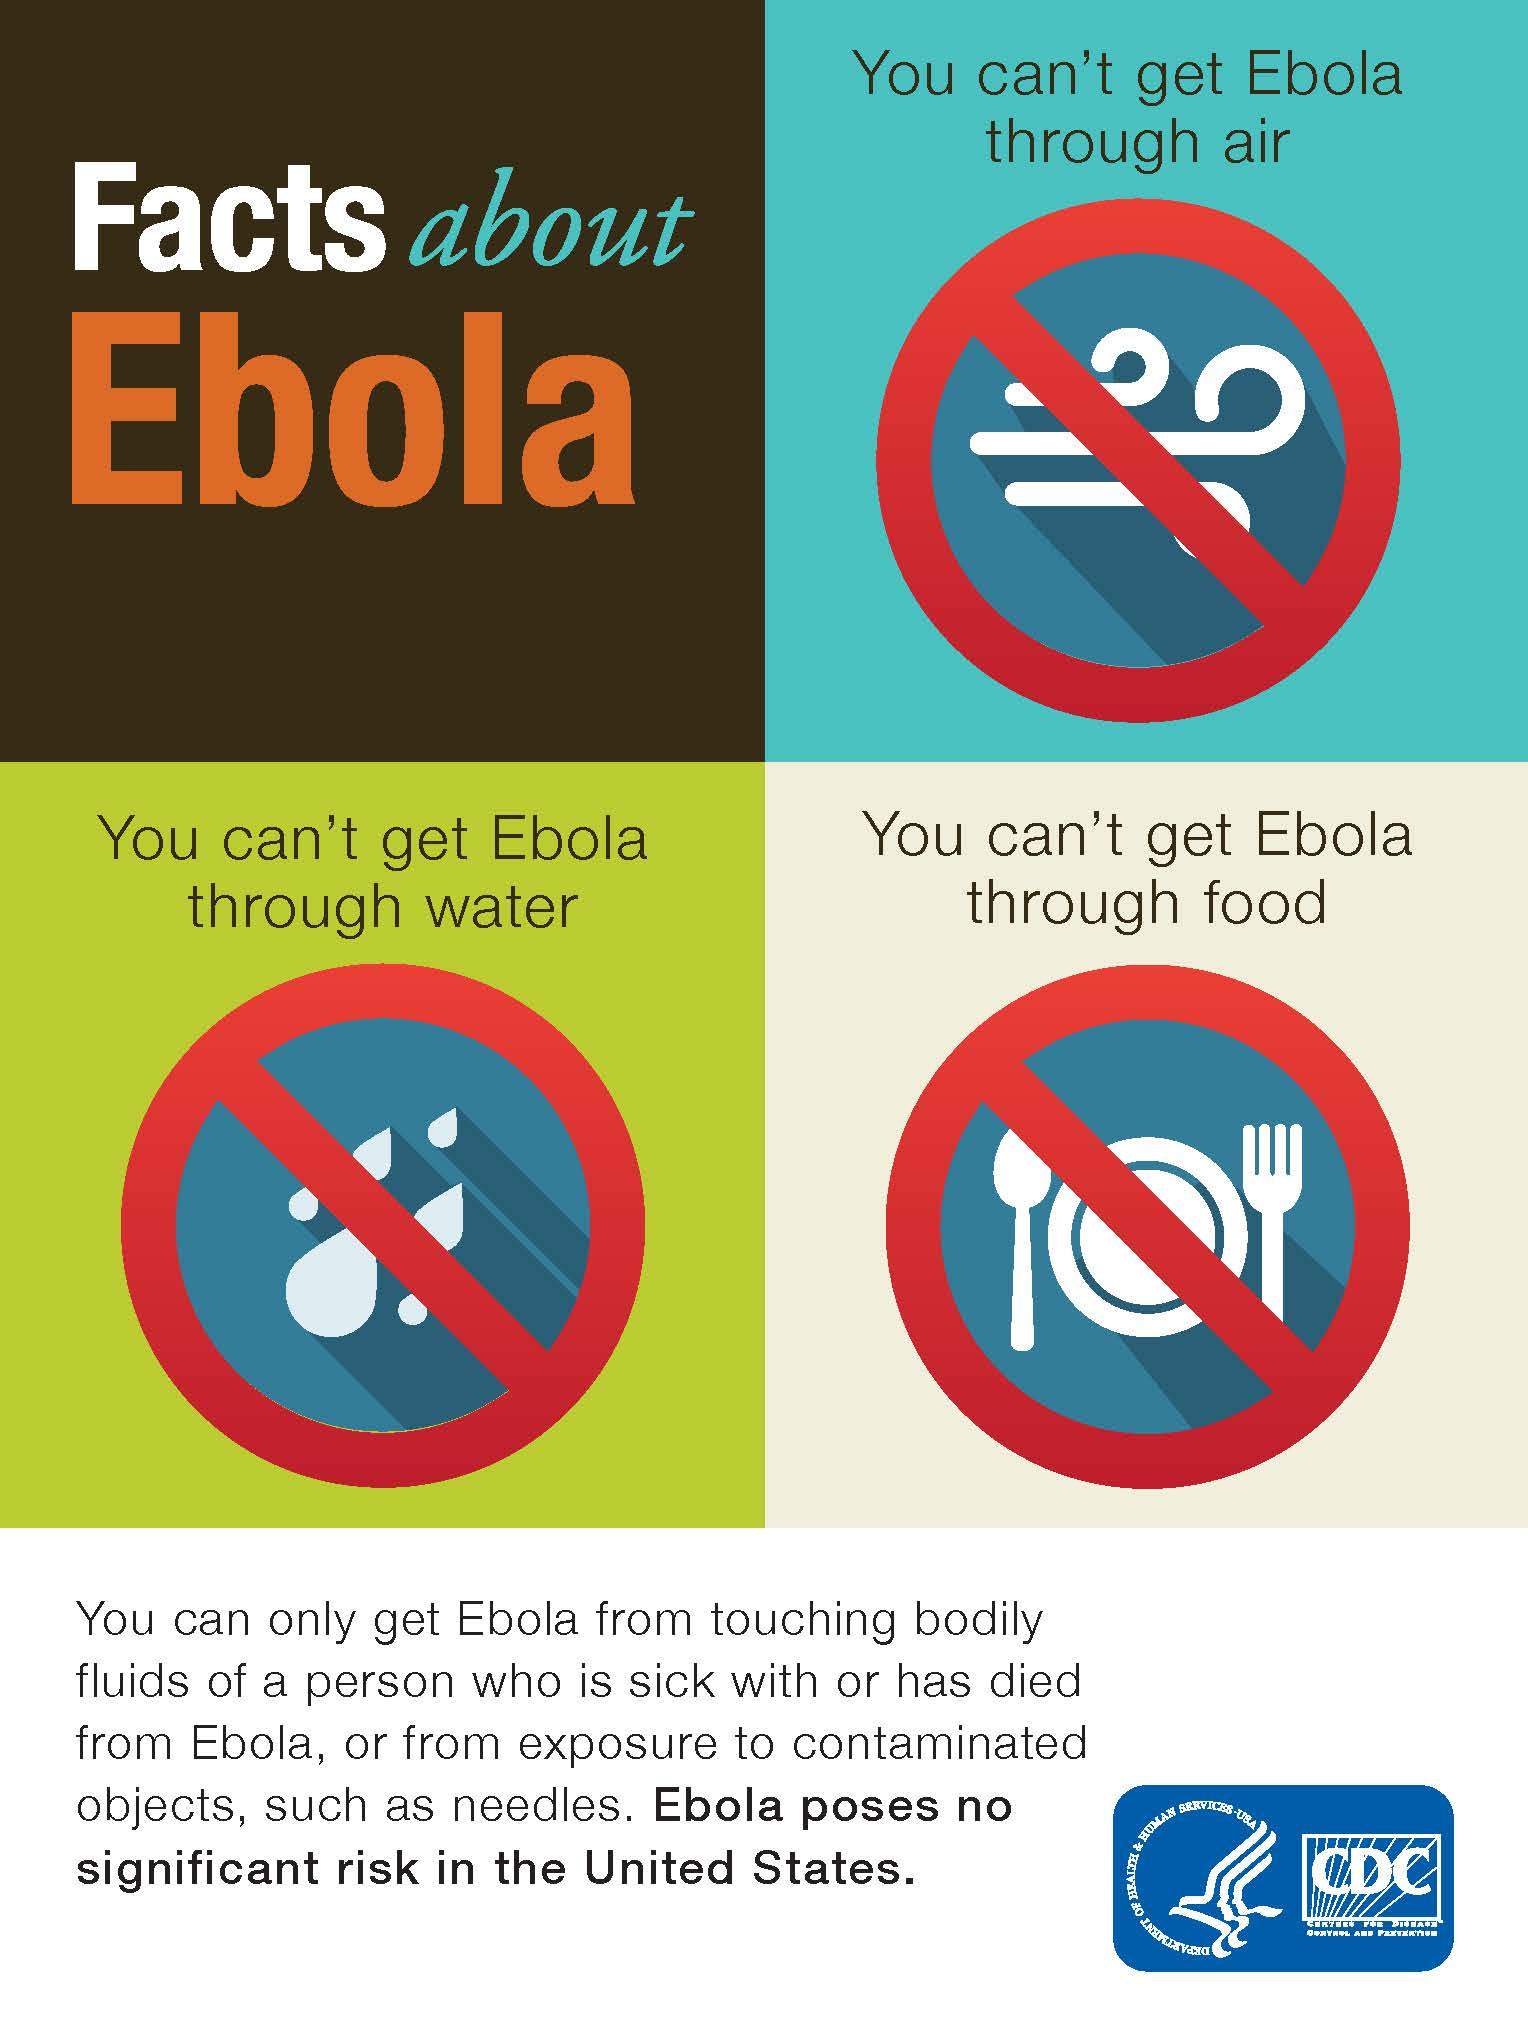 Ebola facts flyer CDC Louisville KY